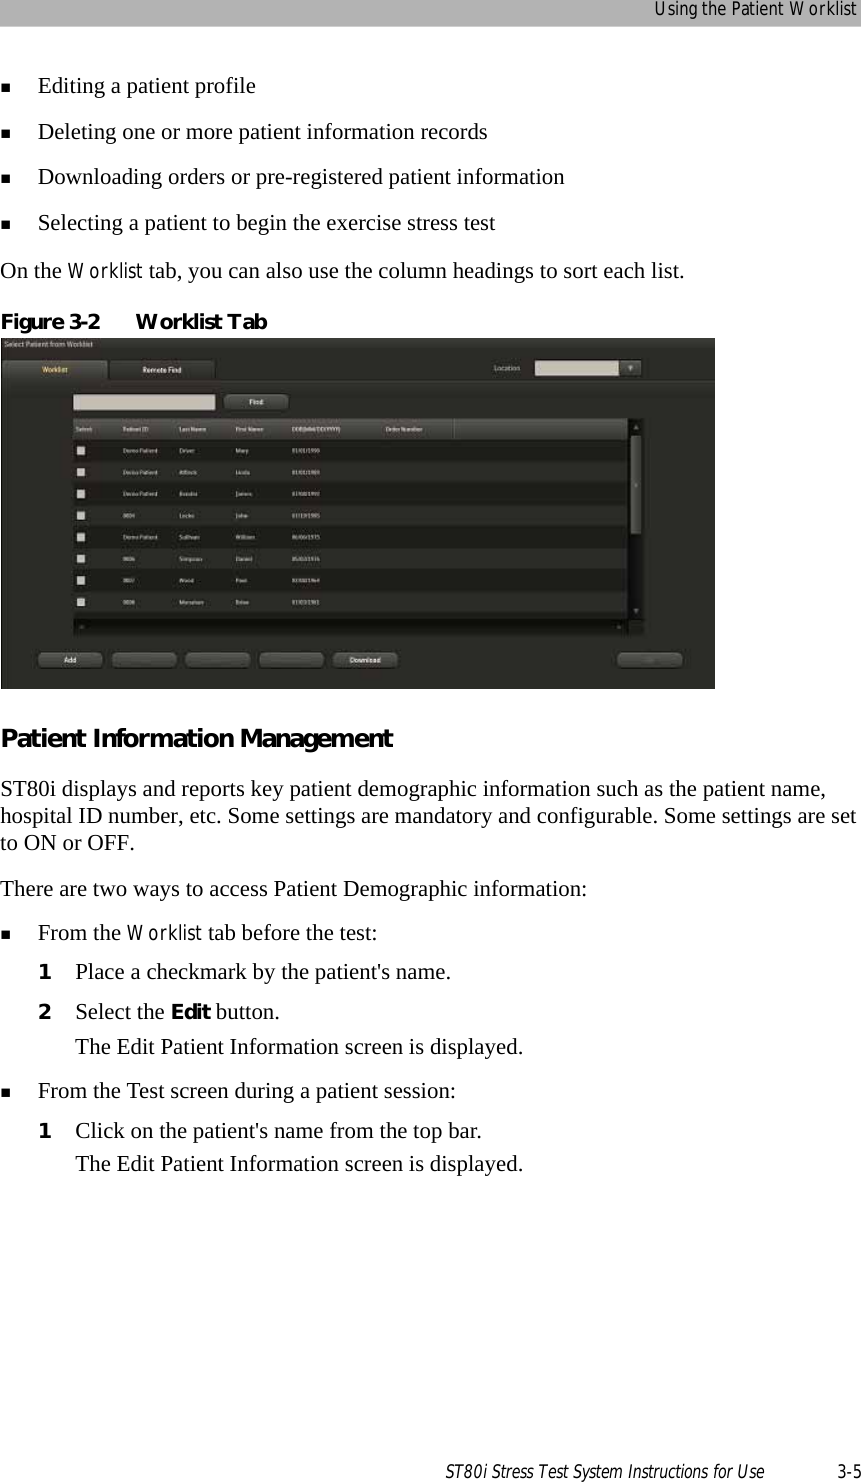 Using the Patient WorklistST80i Stress Test System Instructions for Use 3-5Editing a patient profileDeleting one or more patient information recordsDownloading orders or pre-registered patient informationSelecting a patient to begin the exercise stress testOn the Worklist tab, you can also use the column headings to sort each list.Figure 3-2 Worklist TabPatient Information Management ST80i displays and reports key patient demographic information such as the patient name, hospital ID number, etc. Some settings are mandatory and configurable. Some settings are set to ON or OFF. There are two ways to access Patient Demographic information:From the Worklist tab before the test:1Place a checkmark by the patient&apos;s name.2Select the Edit button.The Edit Patient Information screen is displayed. From the Test screen during a patient session:1Click on the patient&apos;s name from the top bar.The Edit Patient Information screen is displayed.